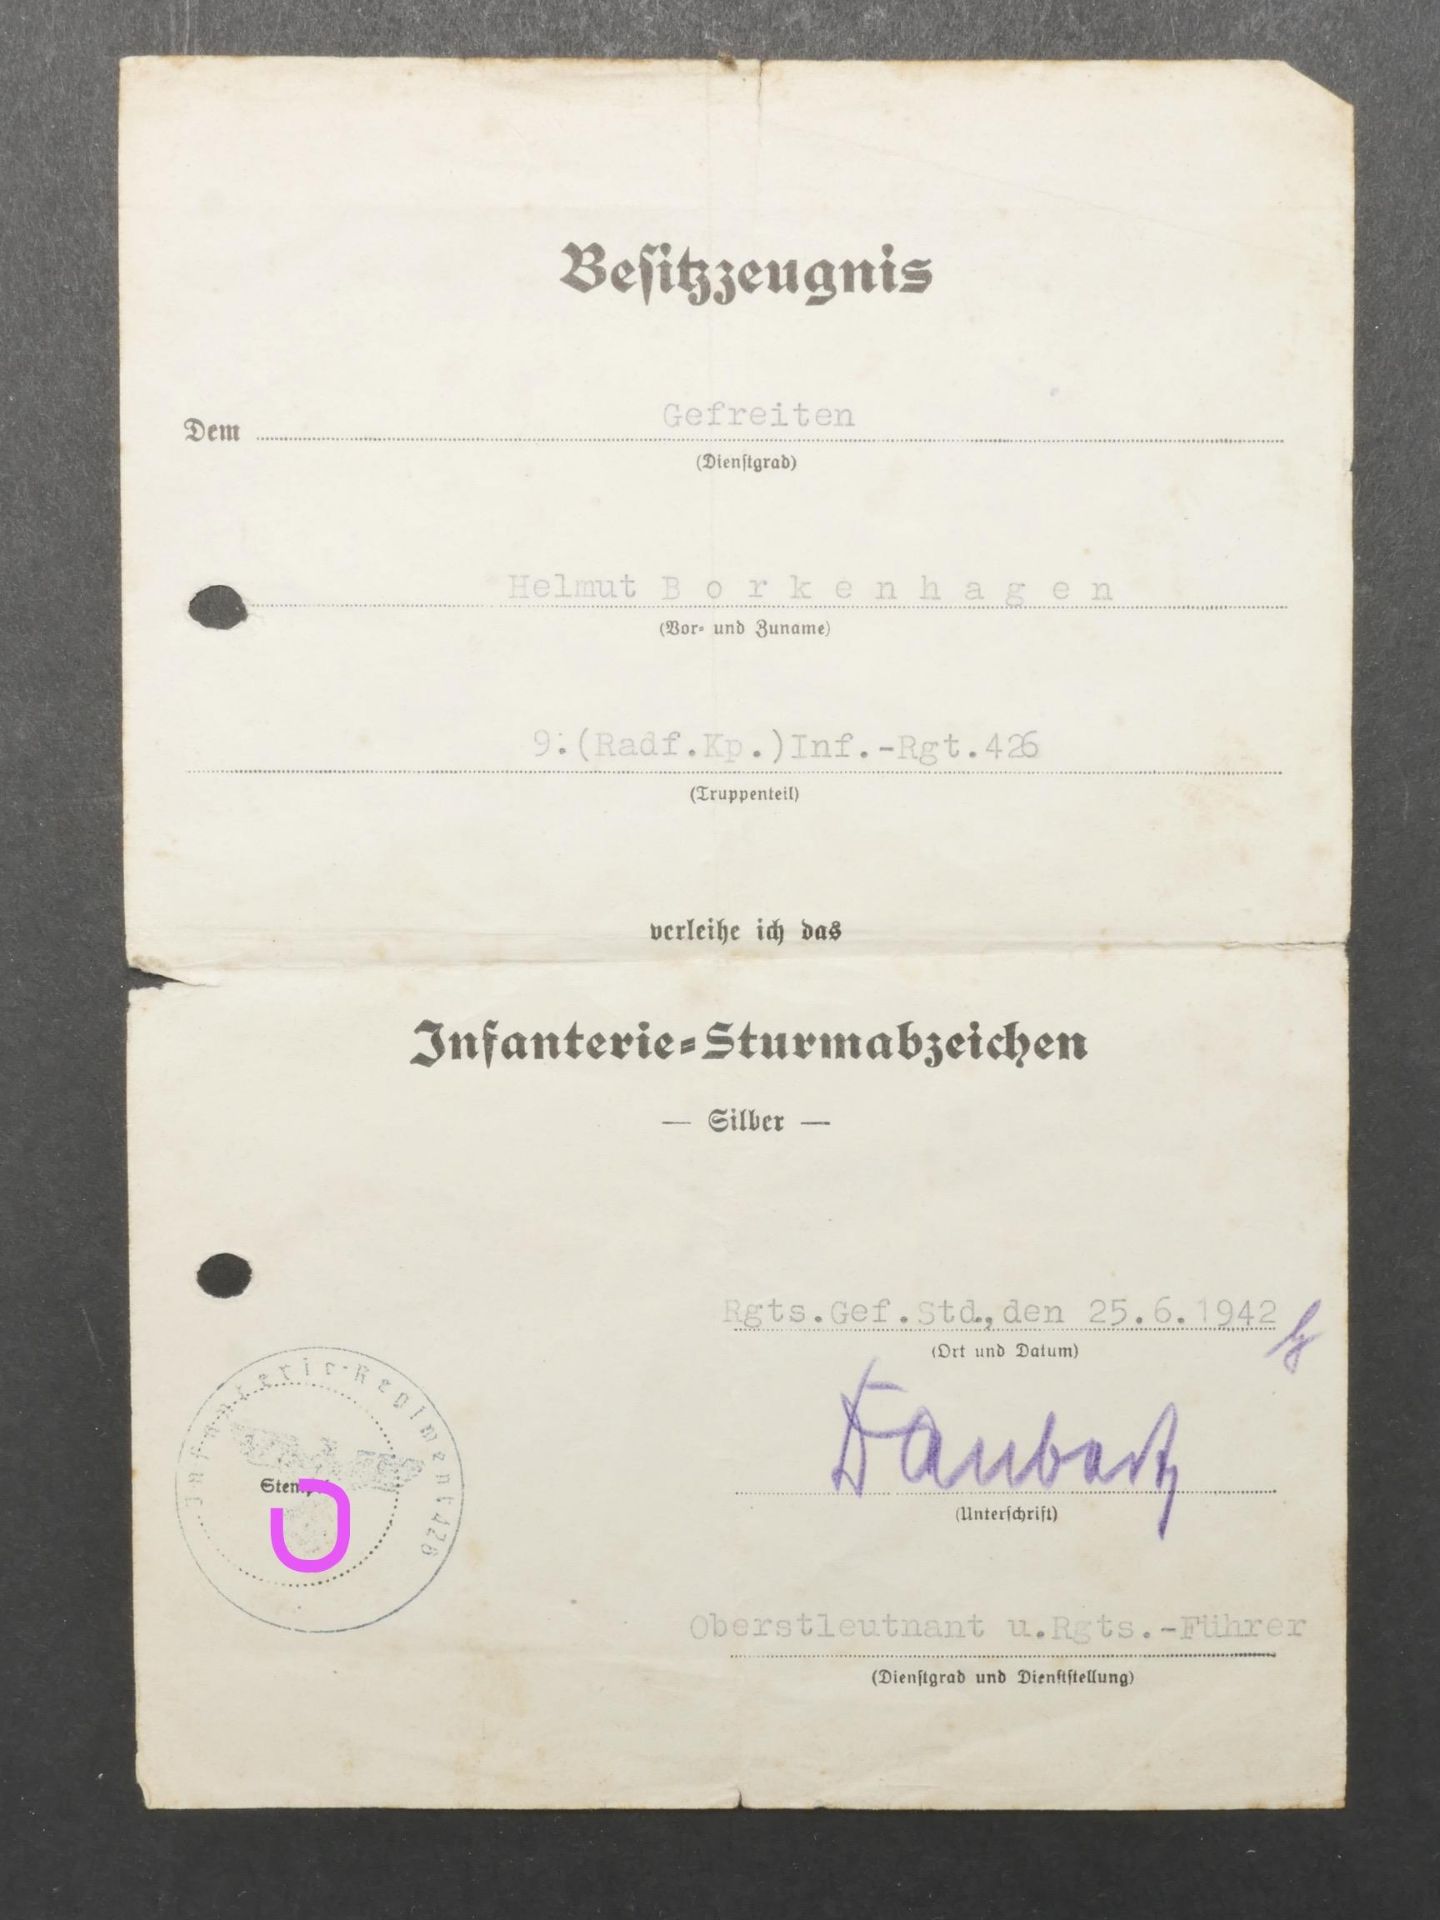 Diplome Infanterie Sturmabzeichen. Infanterie Sturmabzeichen diploma. - Image 2 of 5